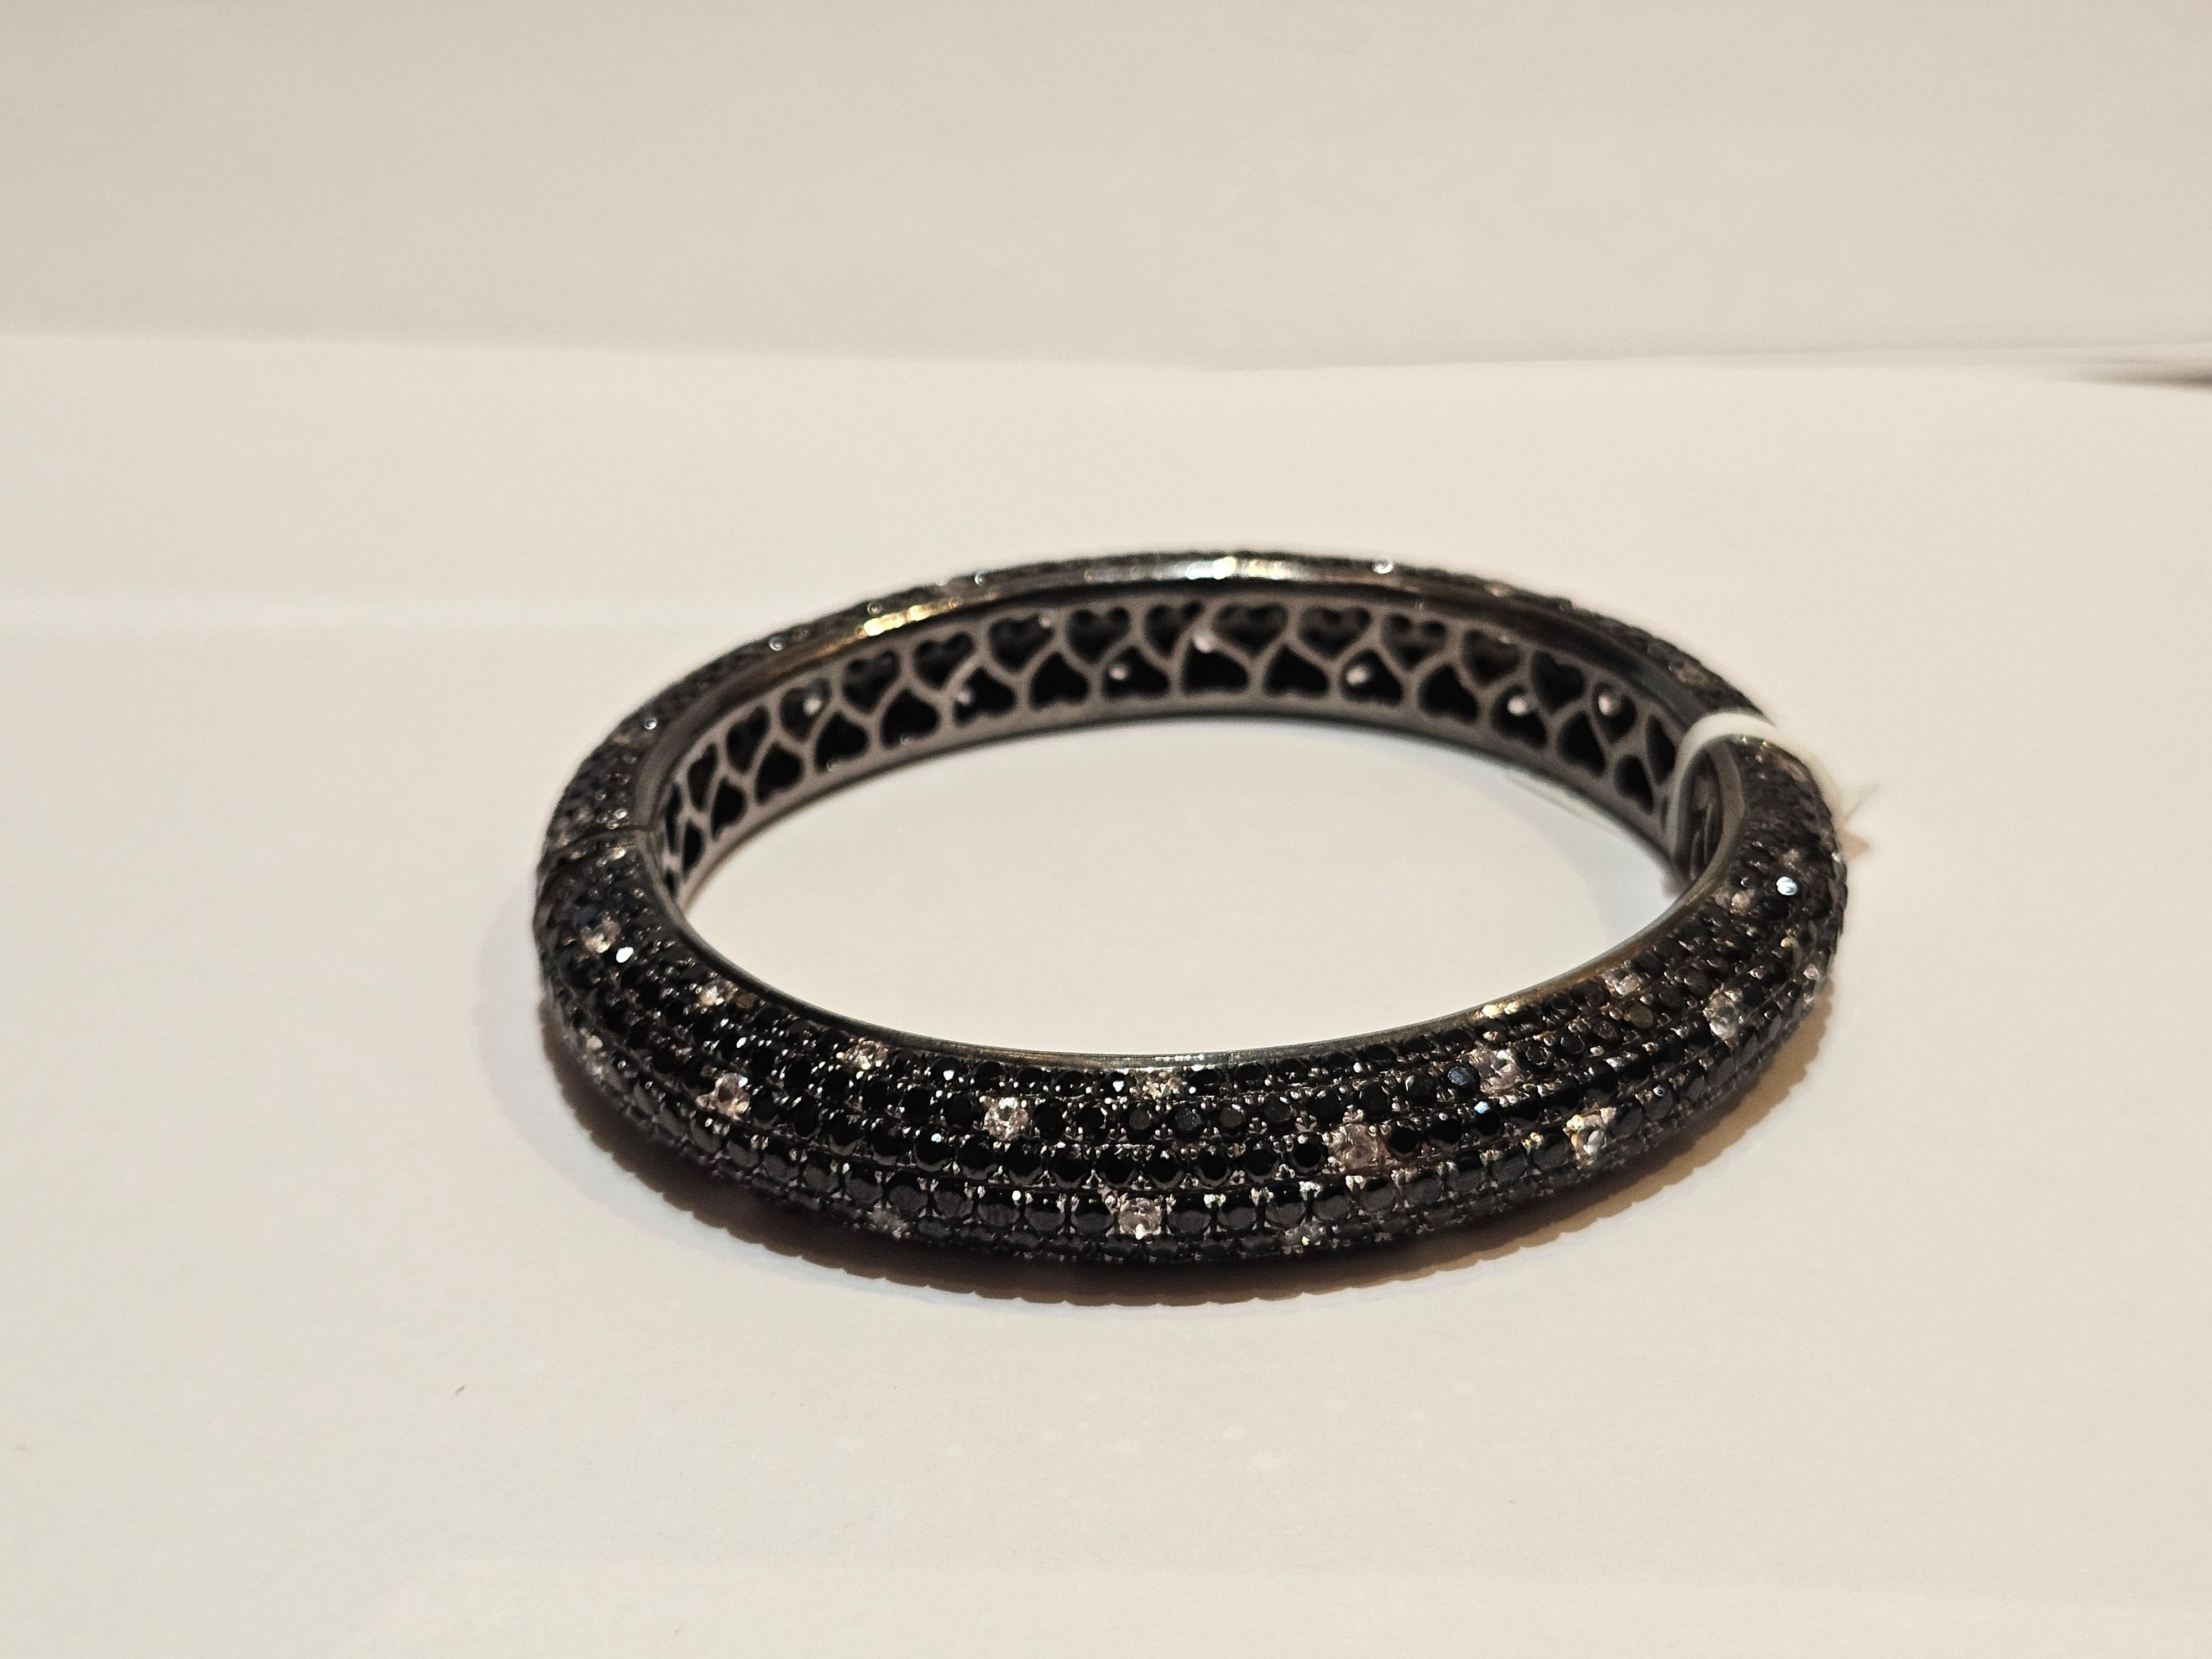 The Following Item we are offering is this Rare Magnificent FANCY BLACK SPINEL WHITE SAPPHIRE STERLING SILVER CUFF BANGLE BRACELET. T.C.W. OVER 26CTS!!! This Magnificent Bangle is a Rare Sample Piece that were sold in select Five Star Hotels and